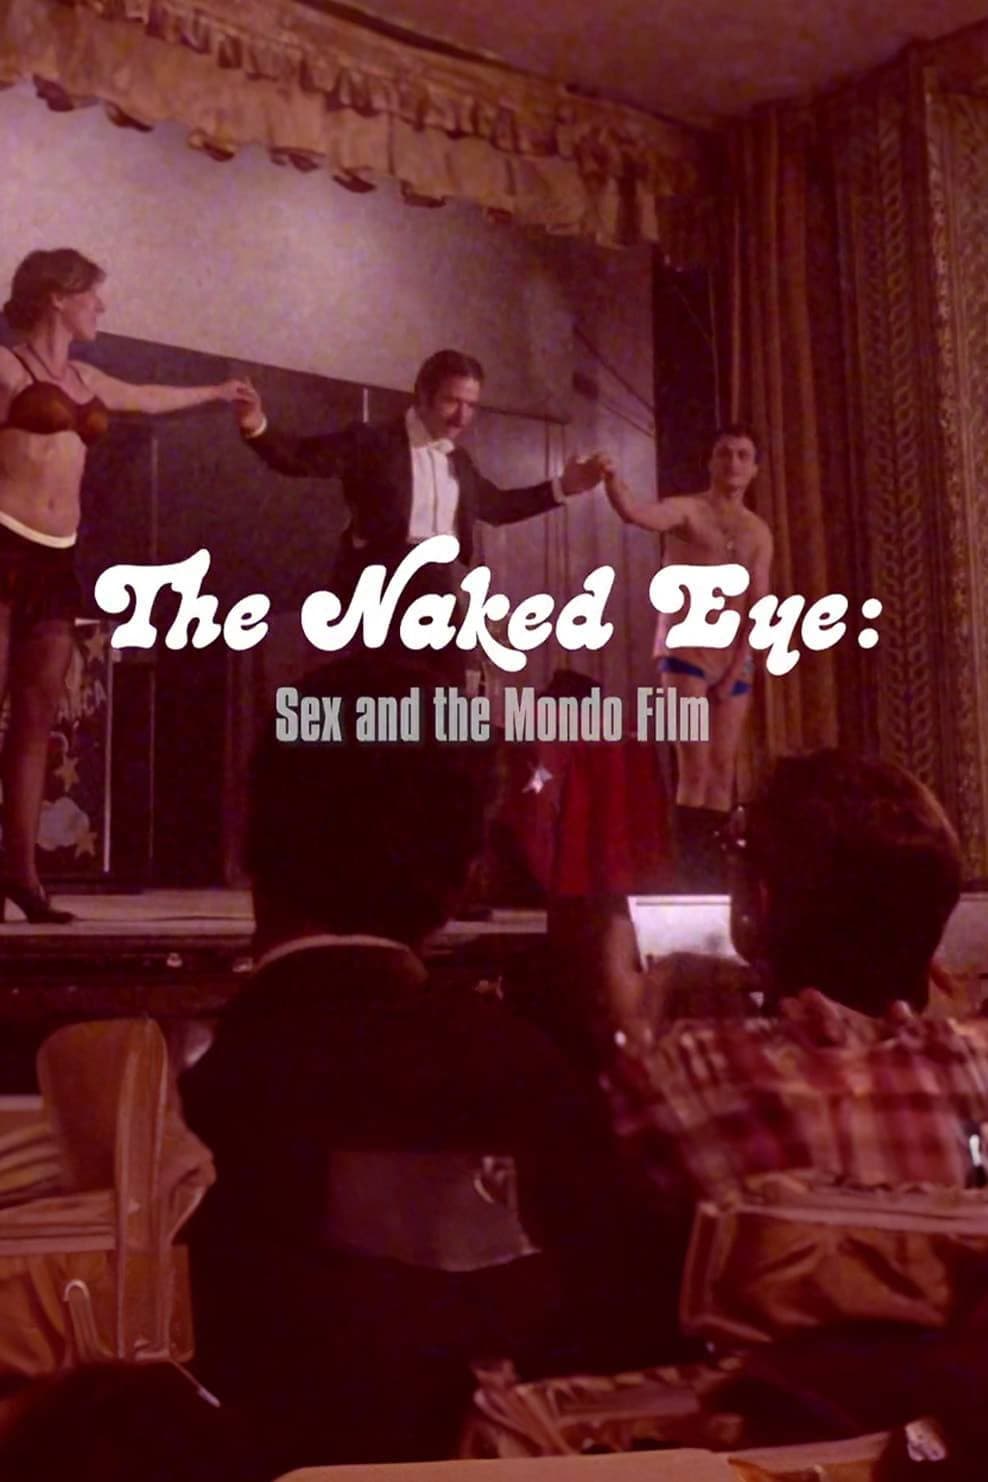 The Naked Eye: Sex and the Mondo Film